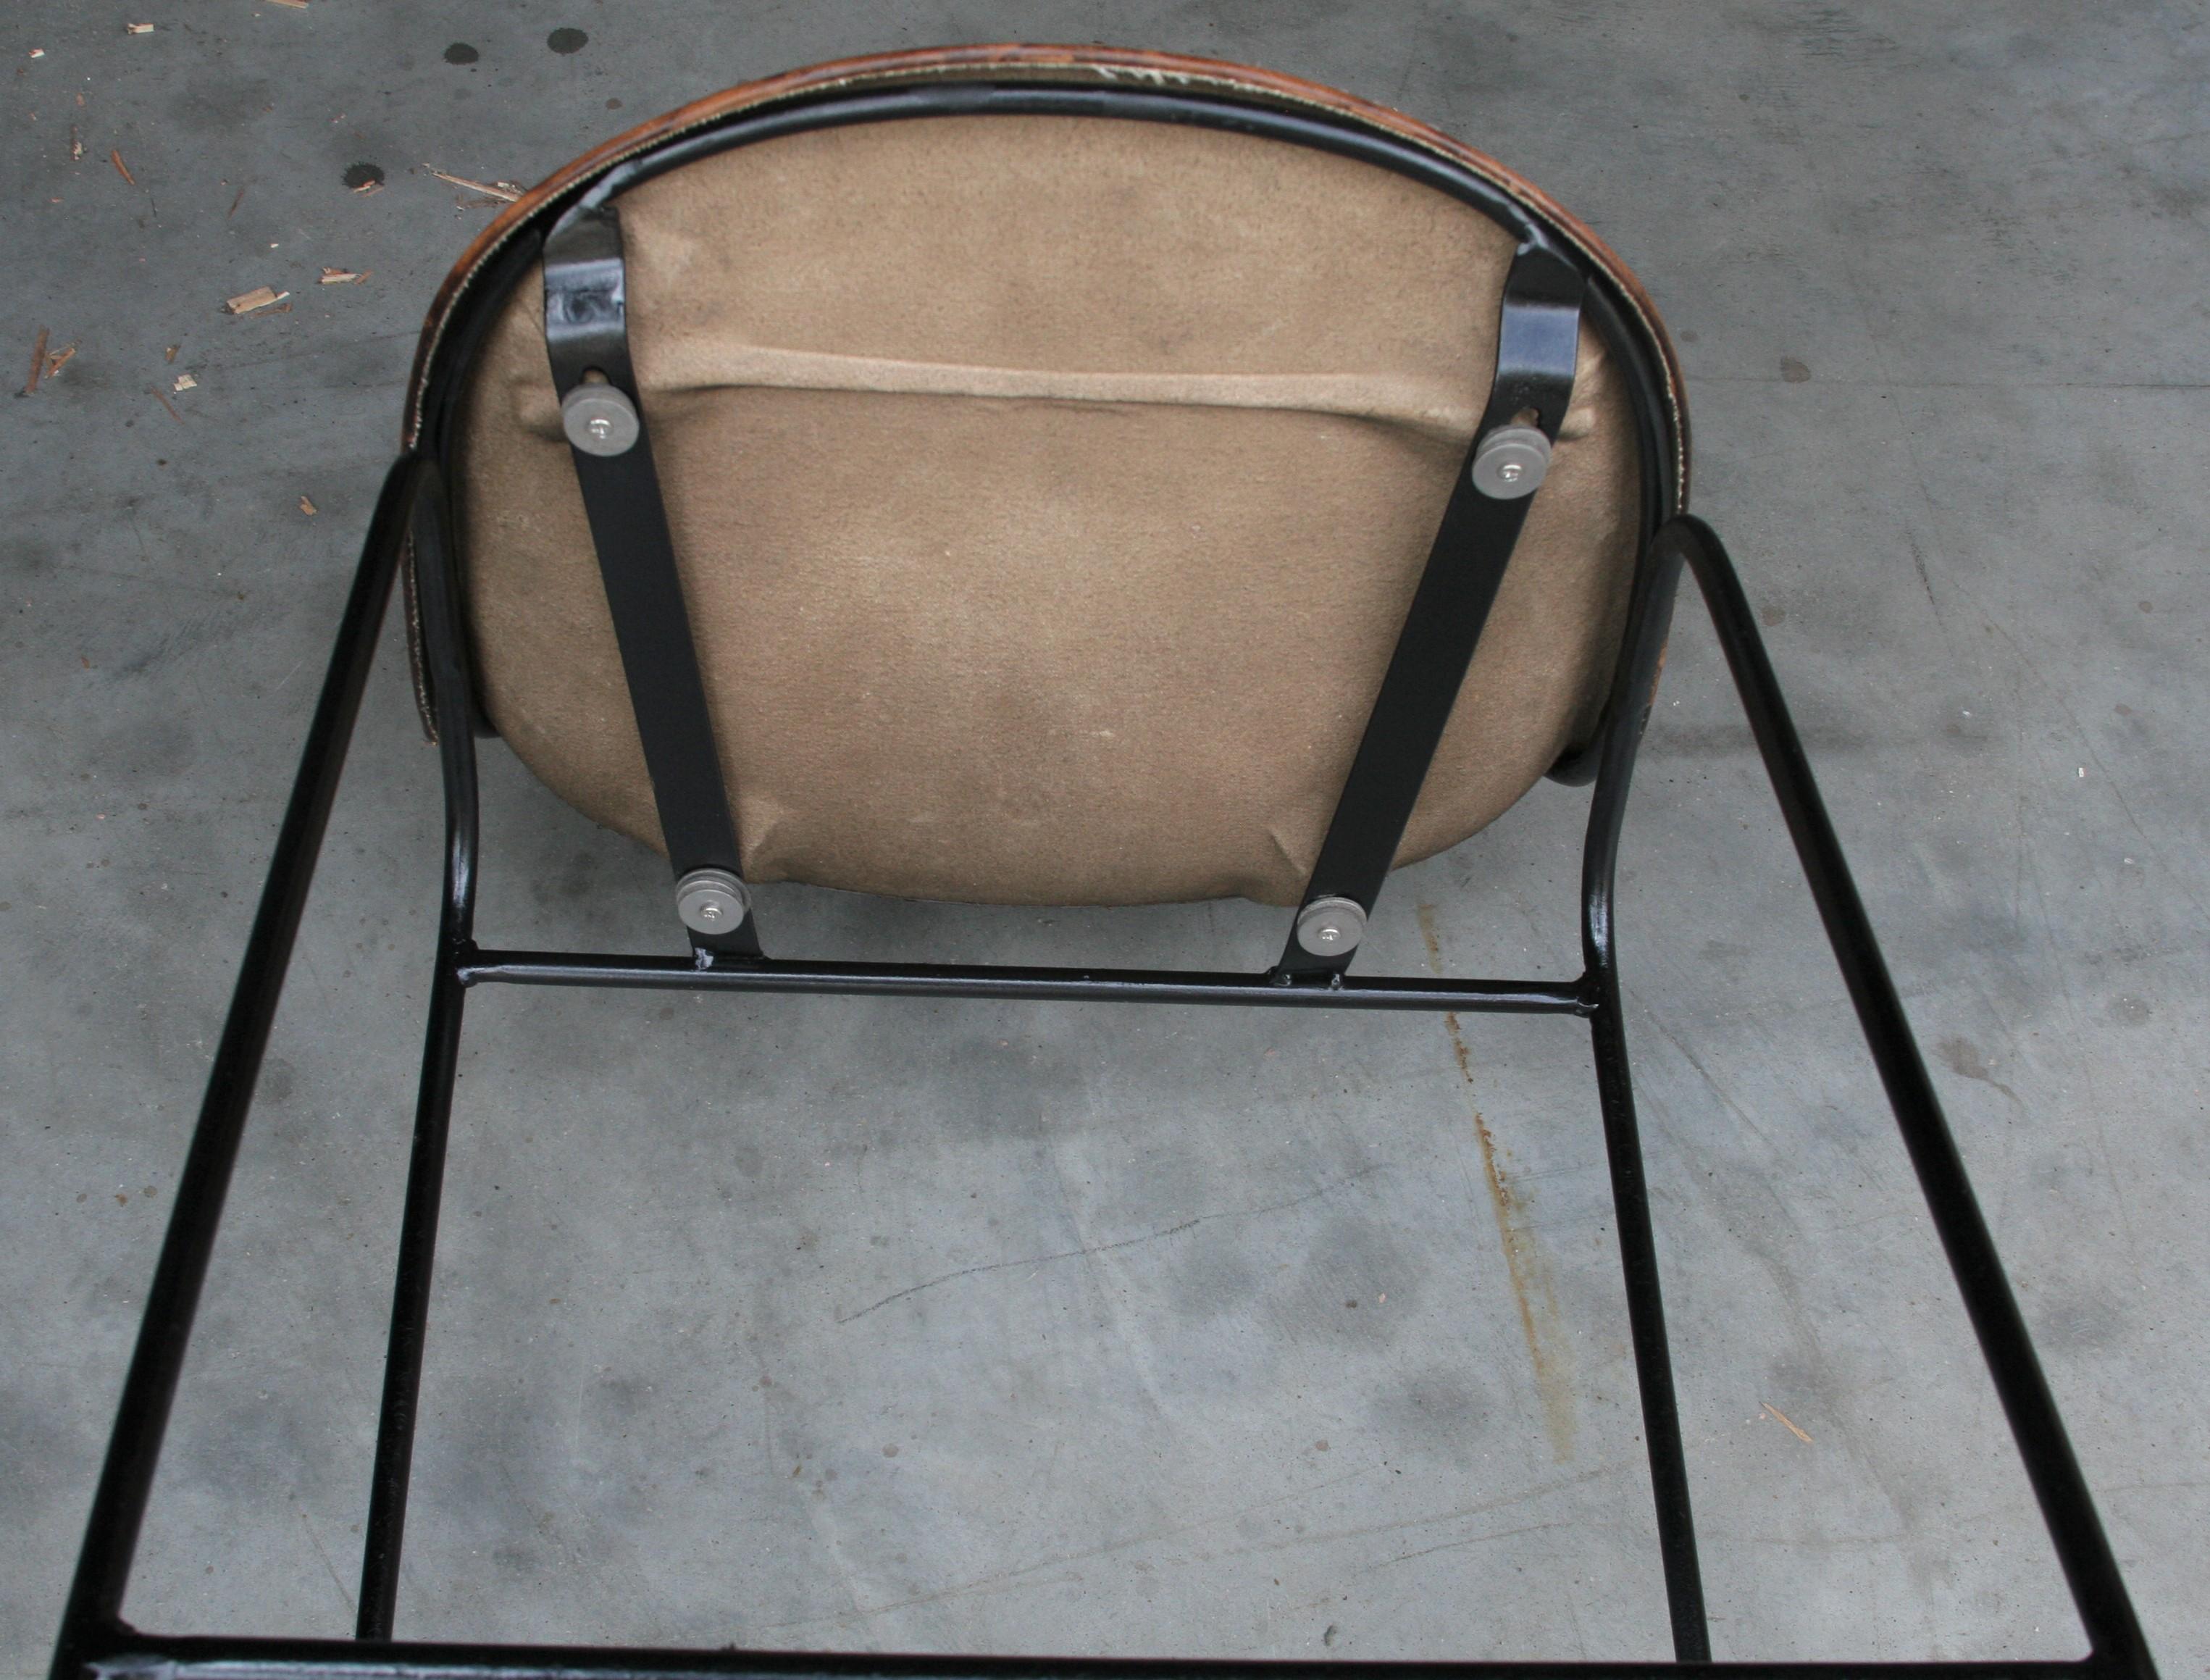 Simple but Elegant Hand Stitched Leather and Solid Steel Bar Chair In Excellent Condition For Sale In Houston, TX